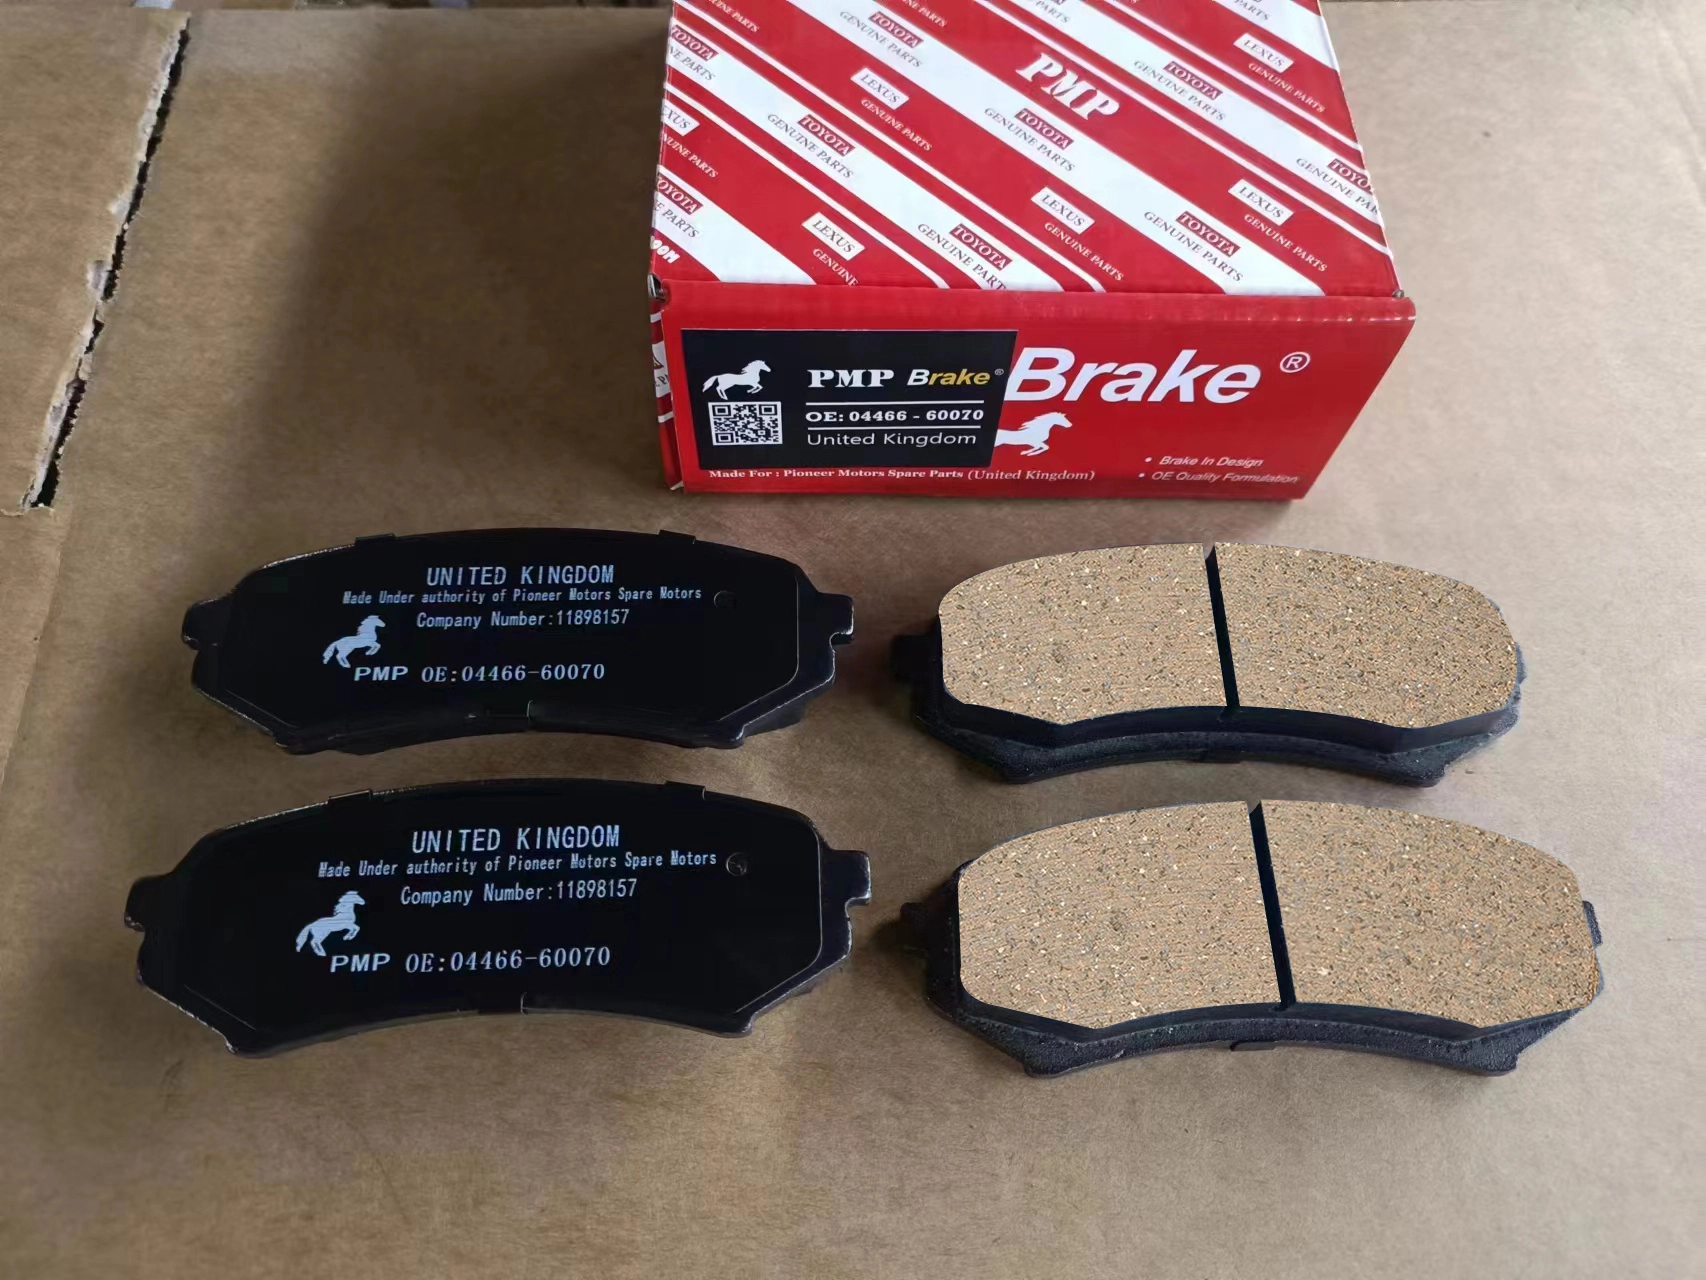  High-quality semi metallic brake pads suitable for Toyota Corolla, offering superior stopping power.